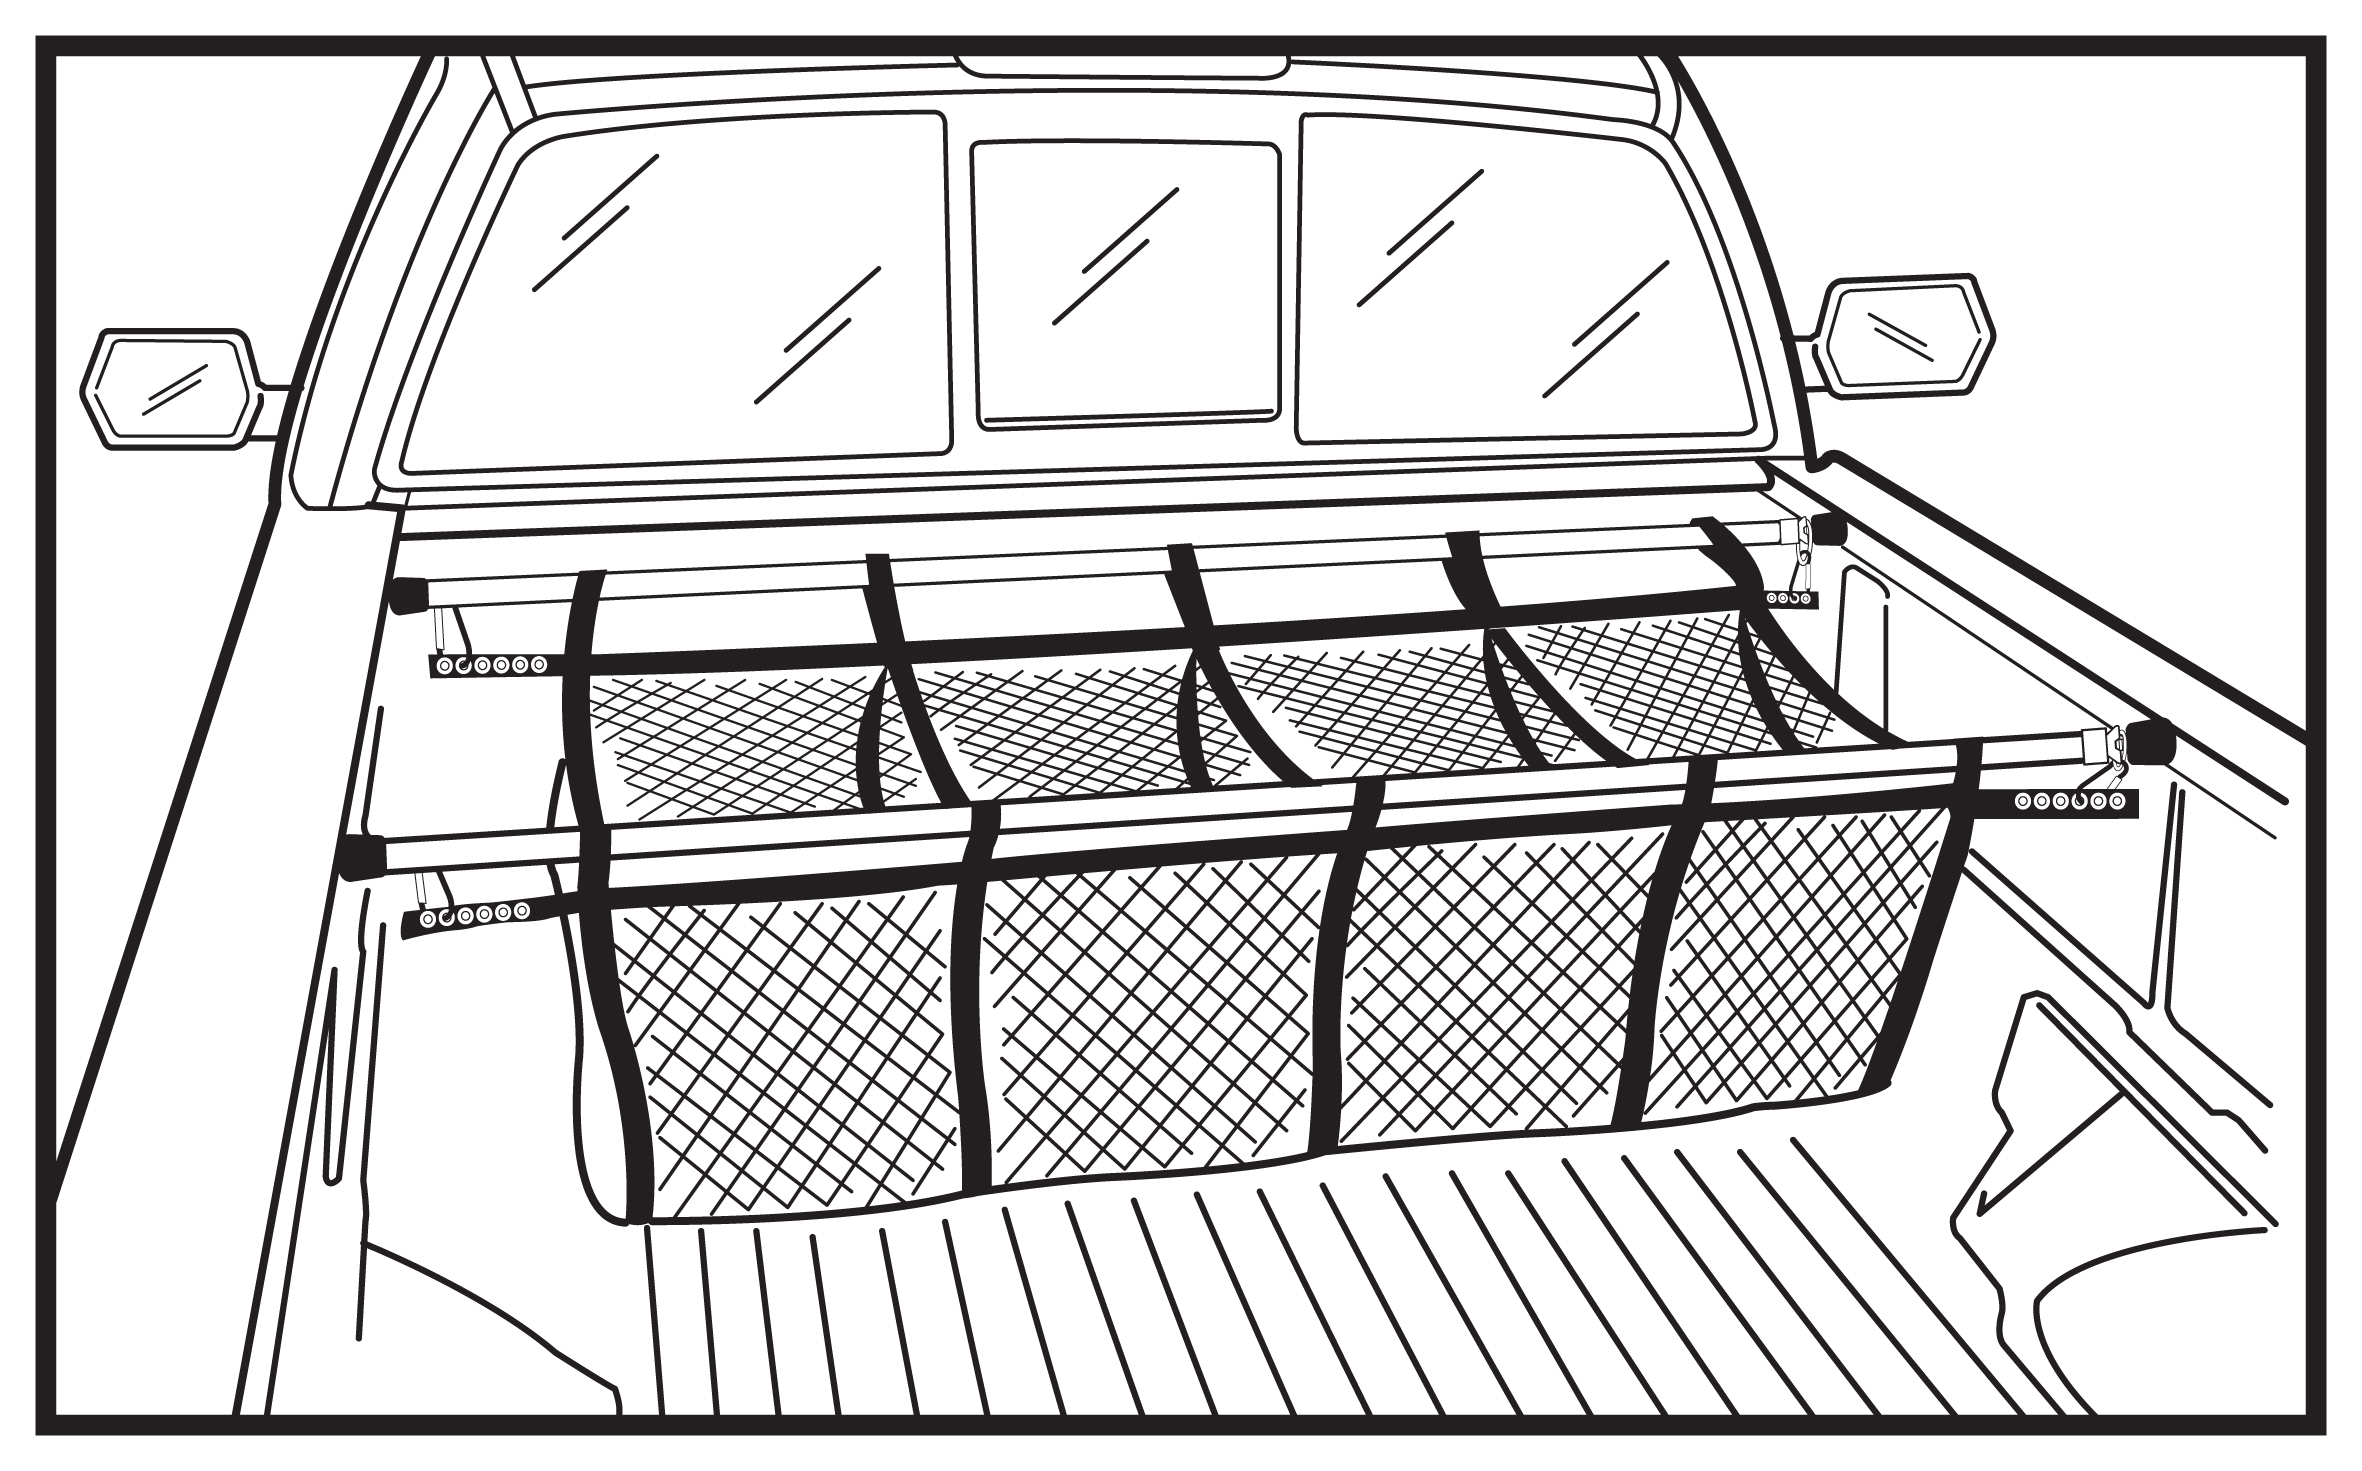 Truck Bed Organizers and the Evolution of the CargoCatch Truck Net